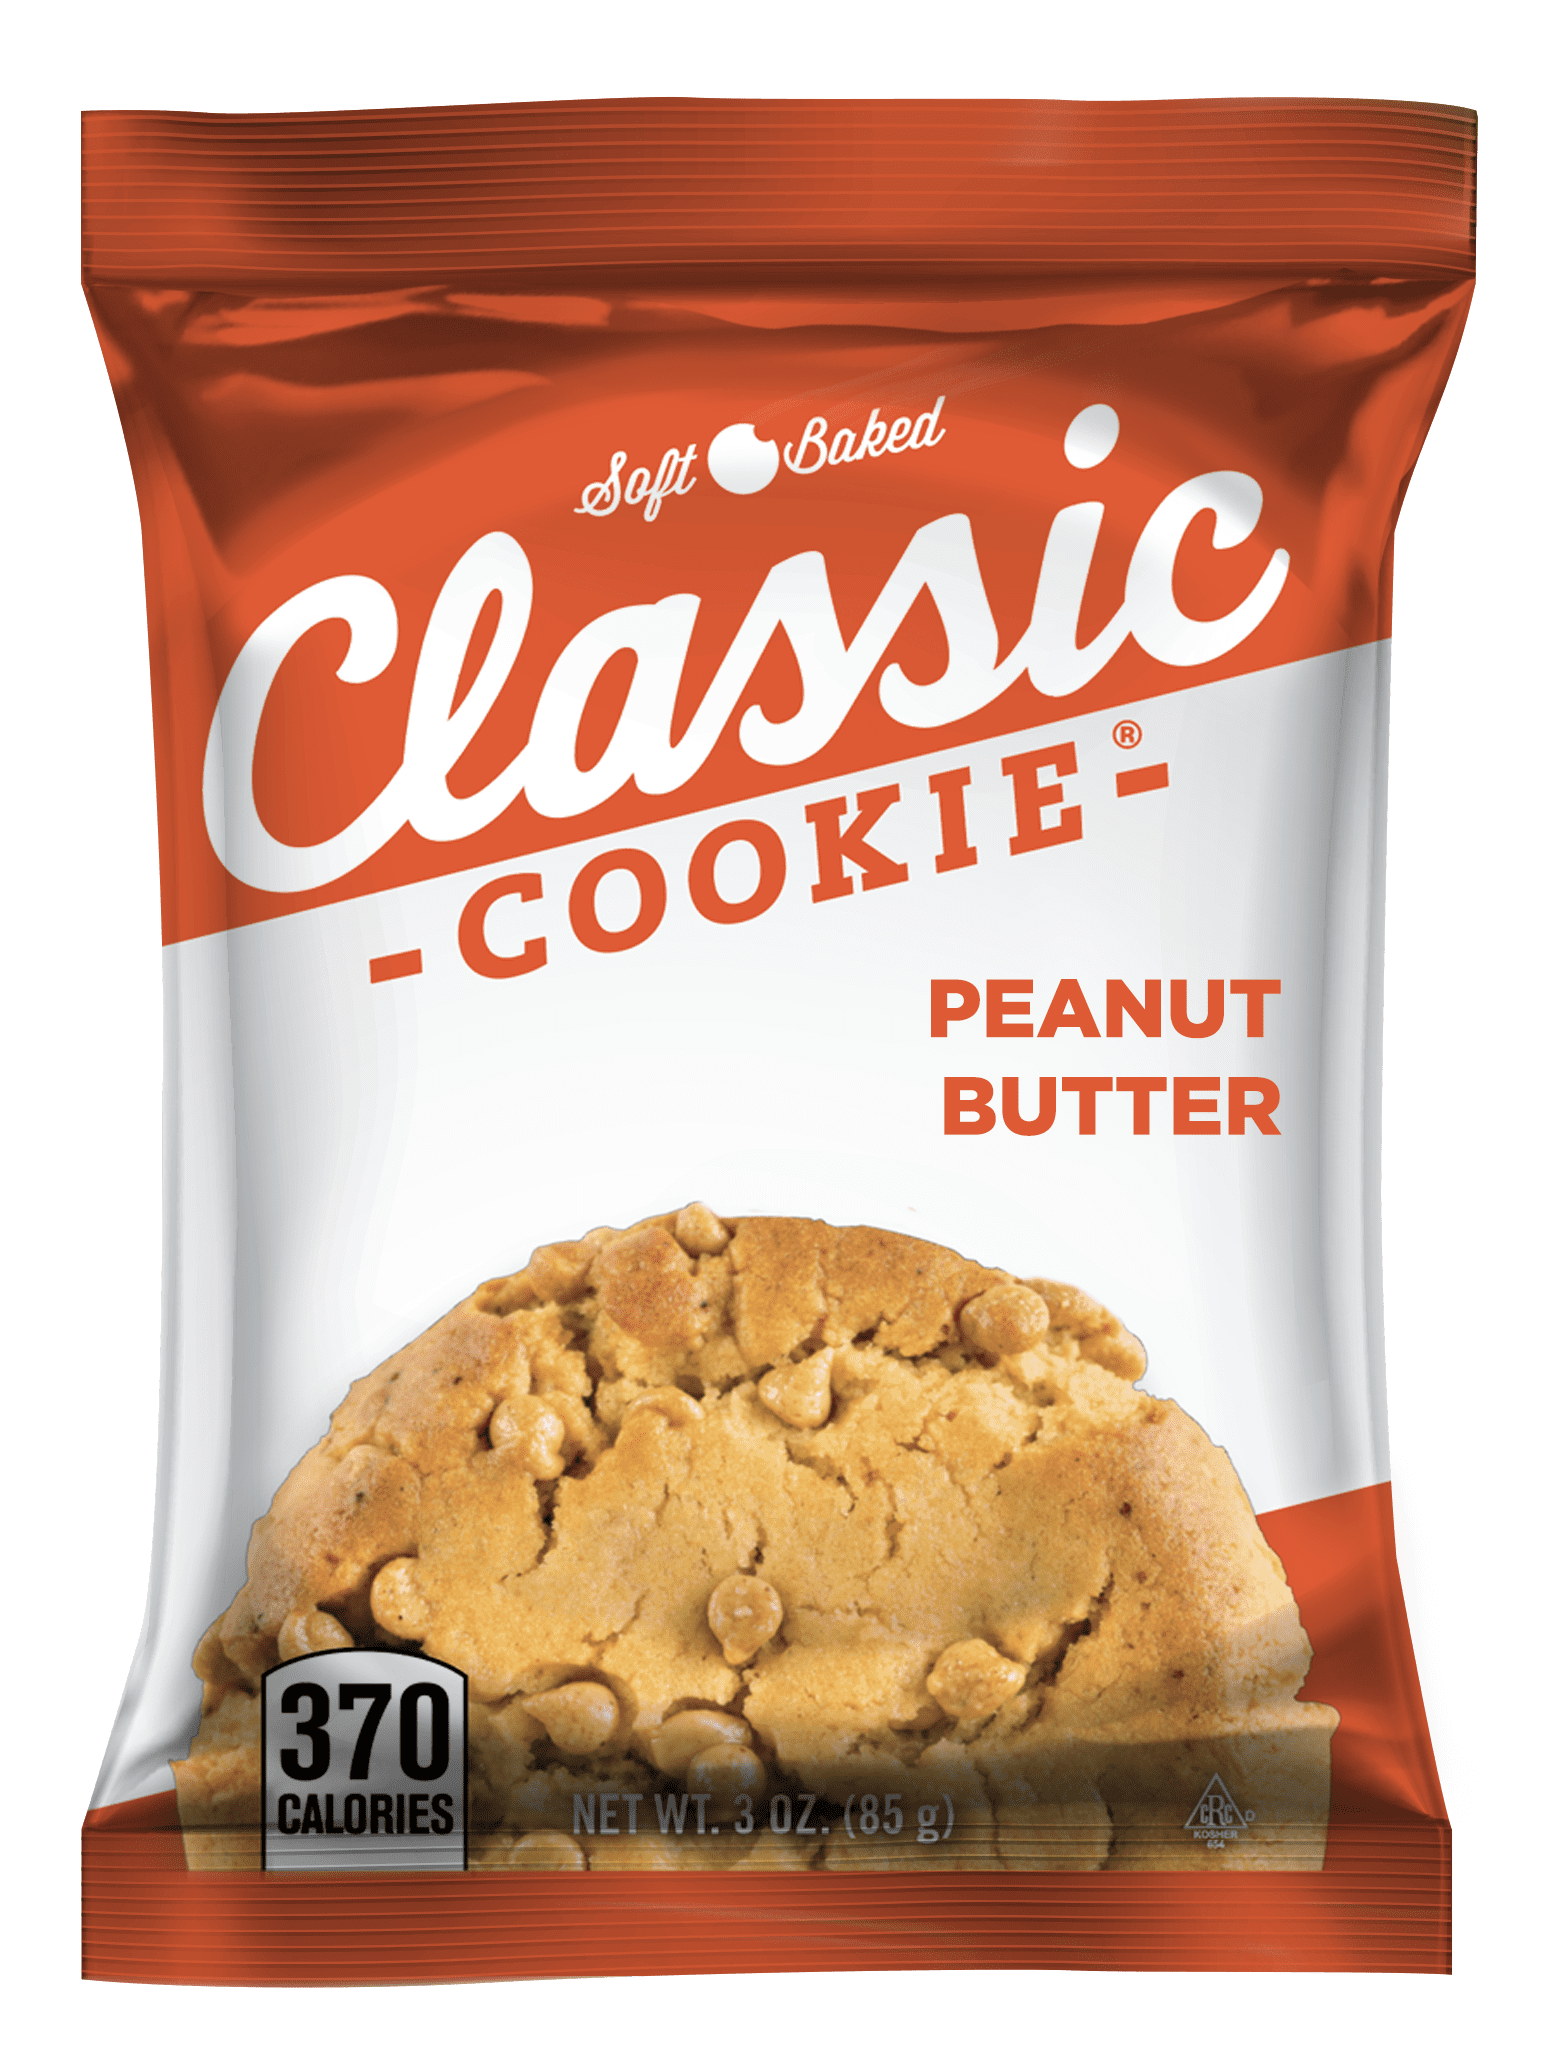 Classic Cookie Soft Baked Chocolate Chip Cookies made with Hershey's® Mini  Kisses, 2 Boxes, 2 Boxes - Kroger